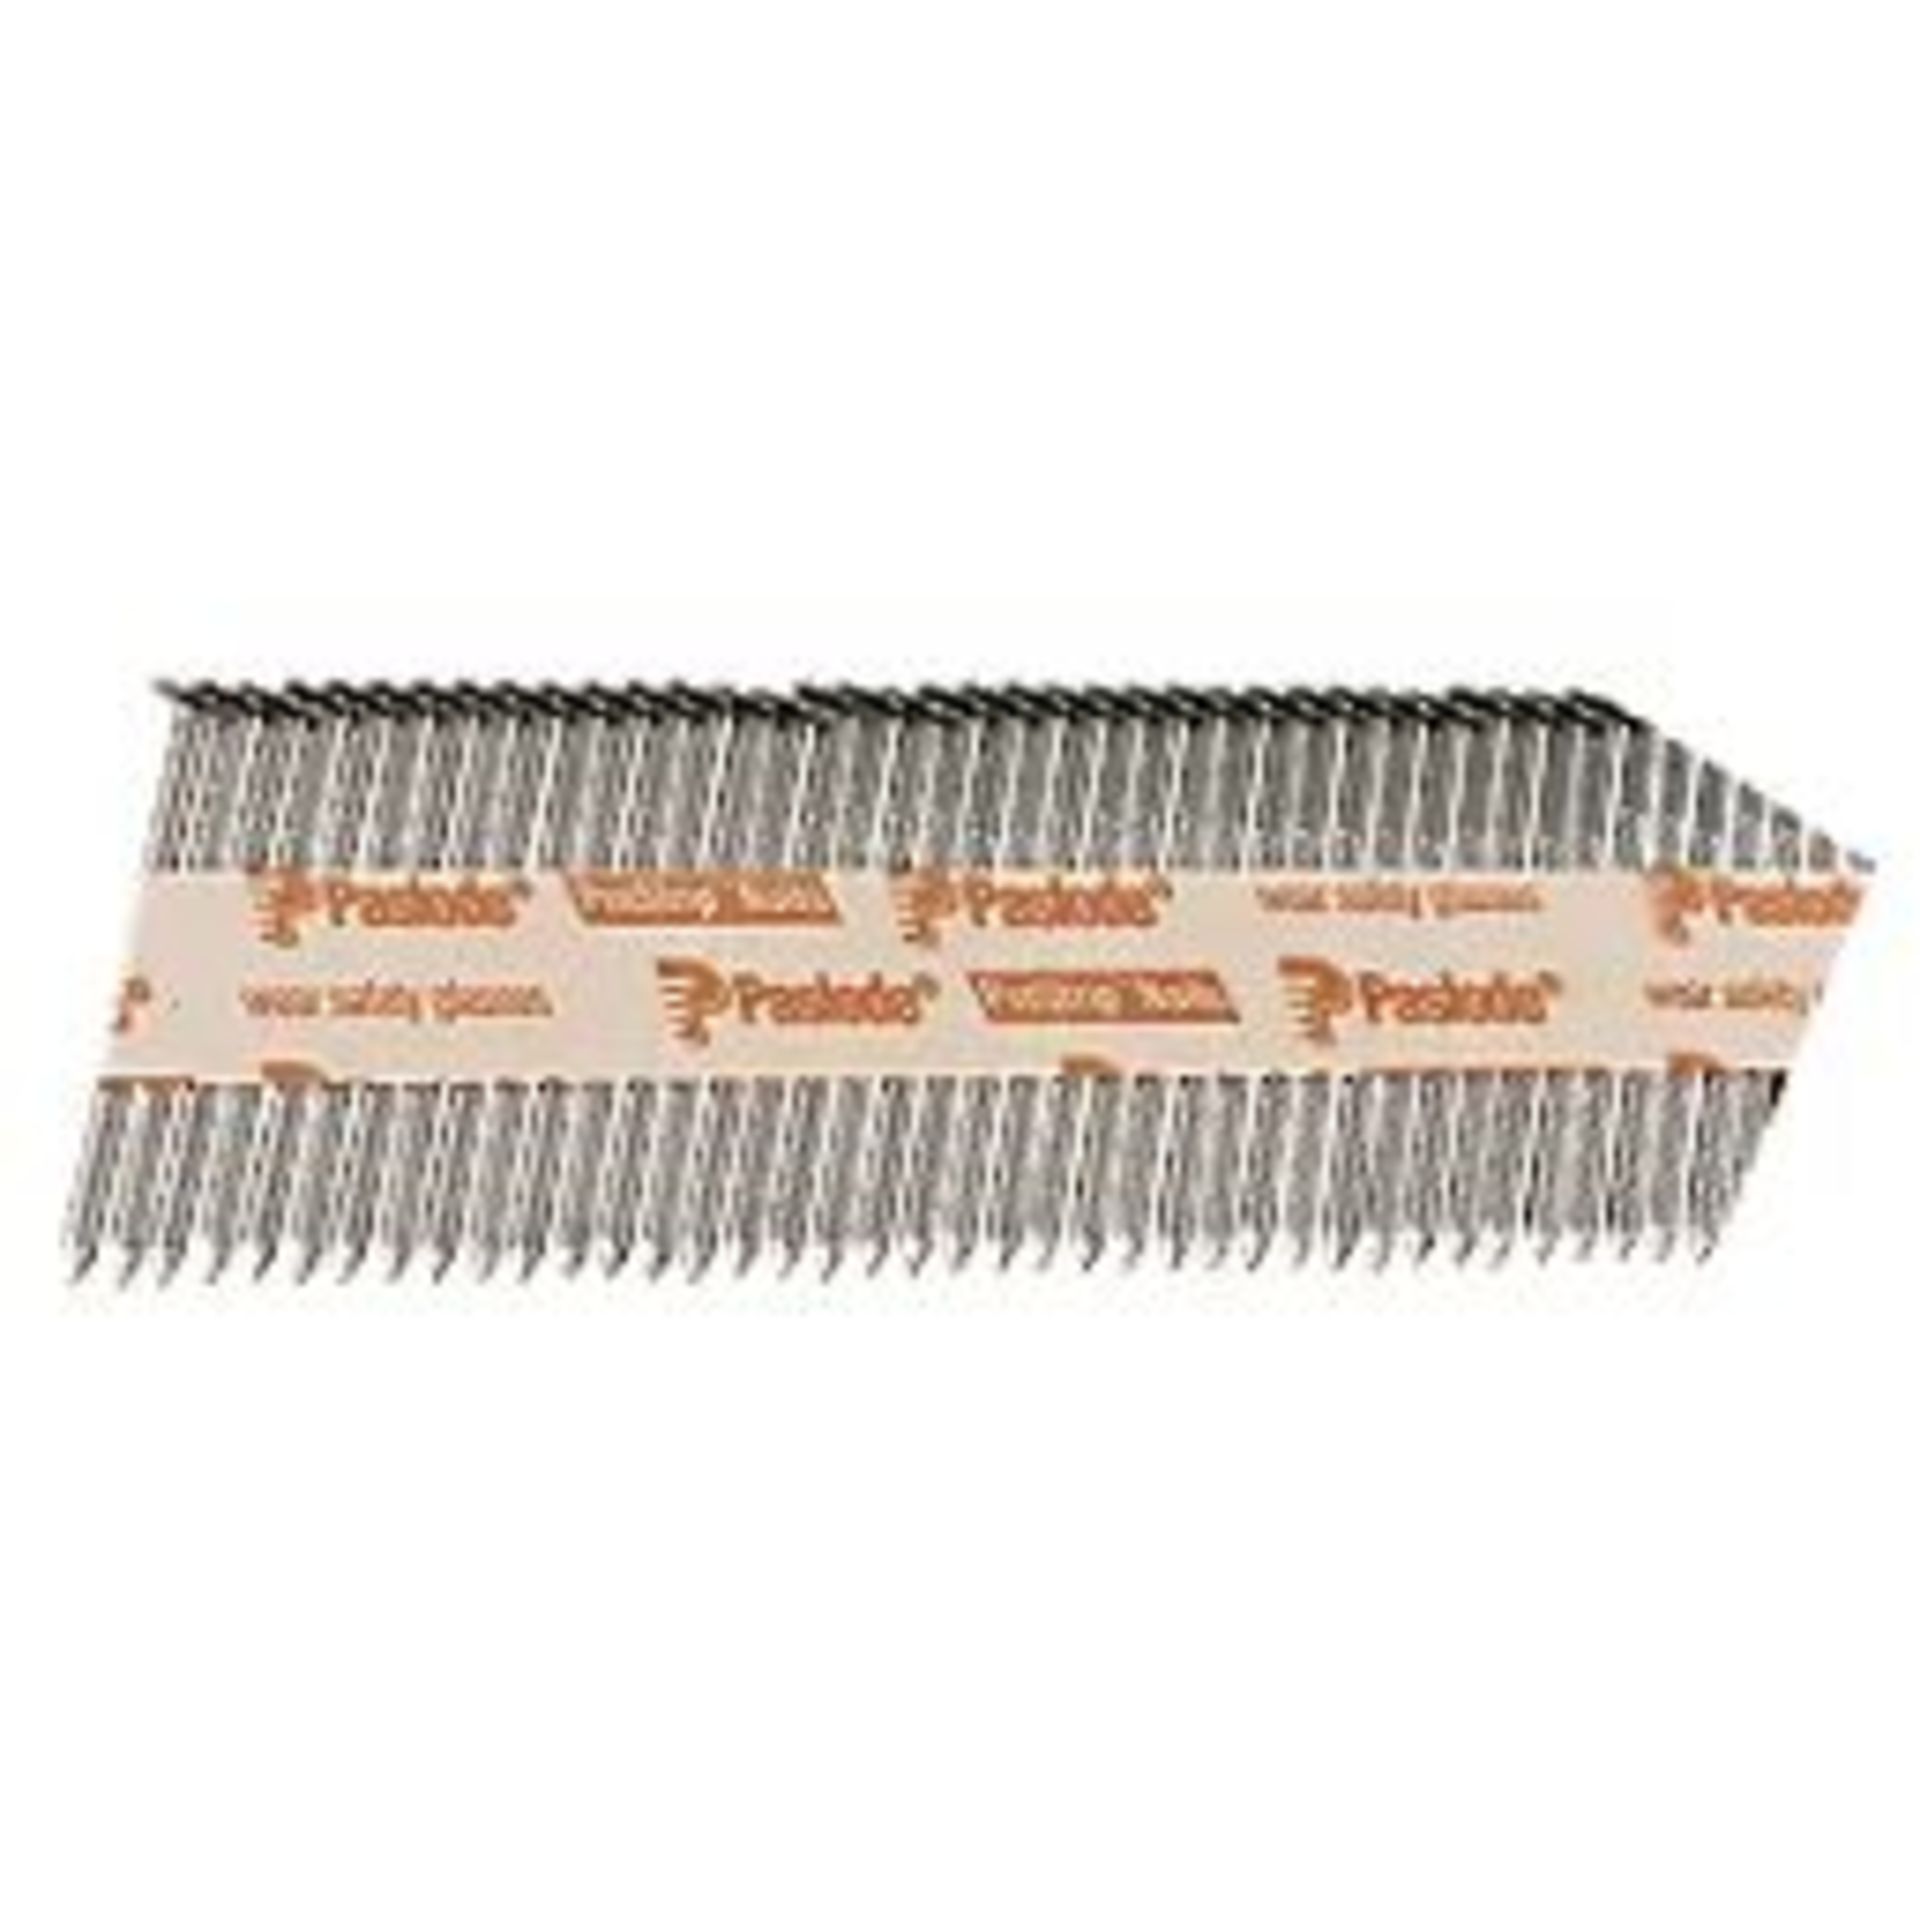 PASLODE HOT DIP GALVANISED IM350 COLLATED RING NAILS 3.1MM X 75MM 1100 PACK. - ER46. RRP £61.99